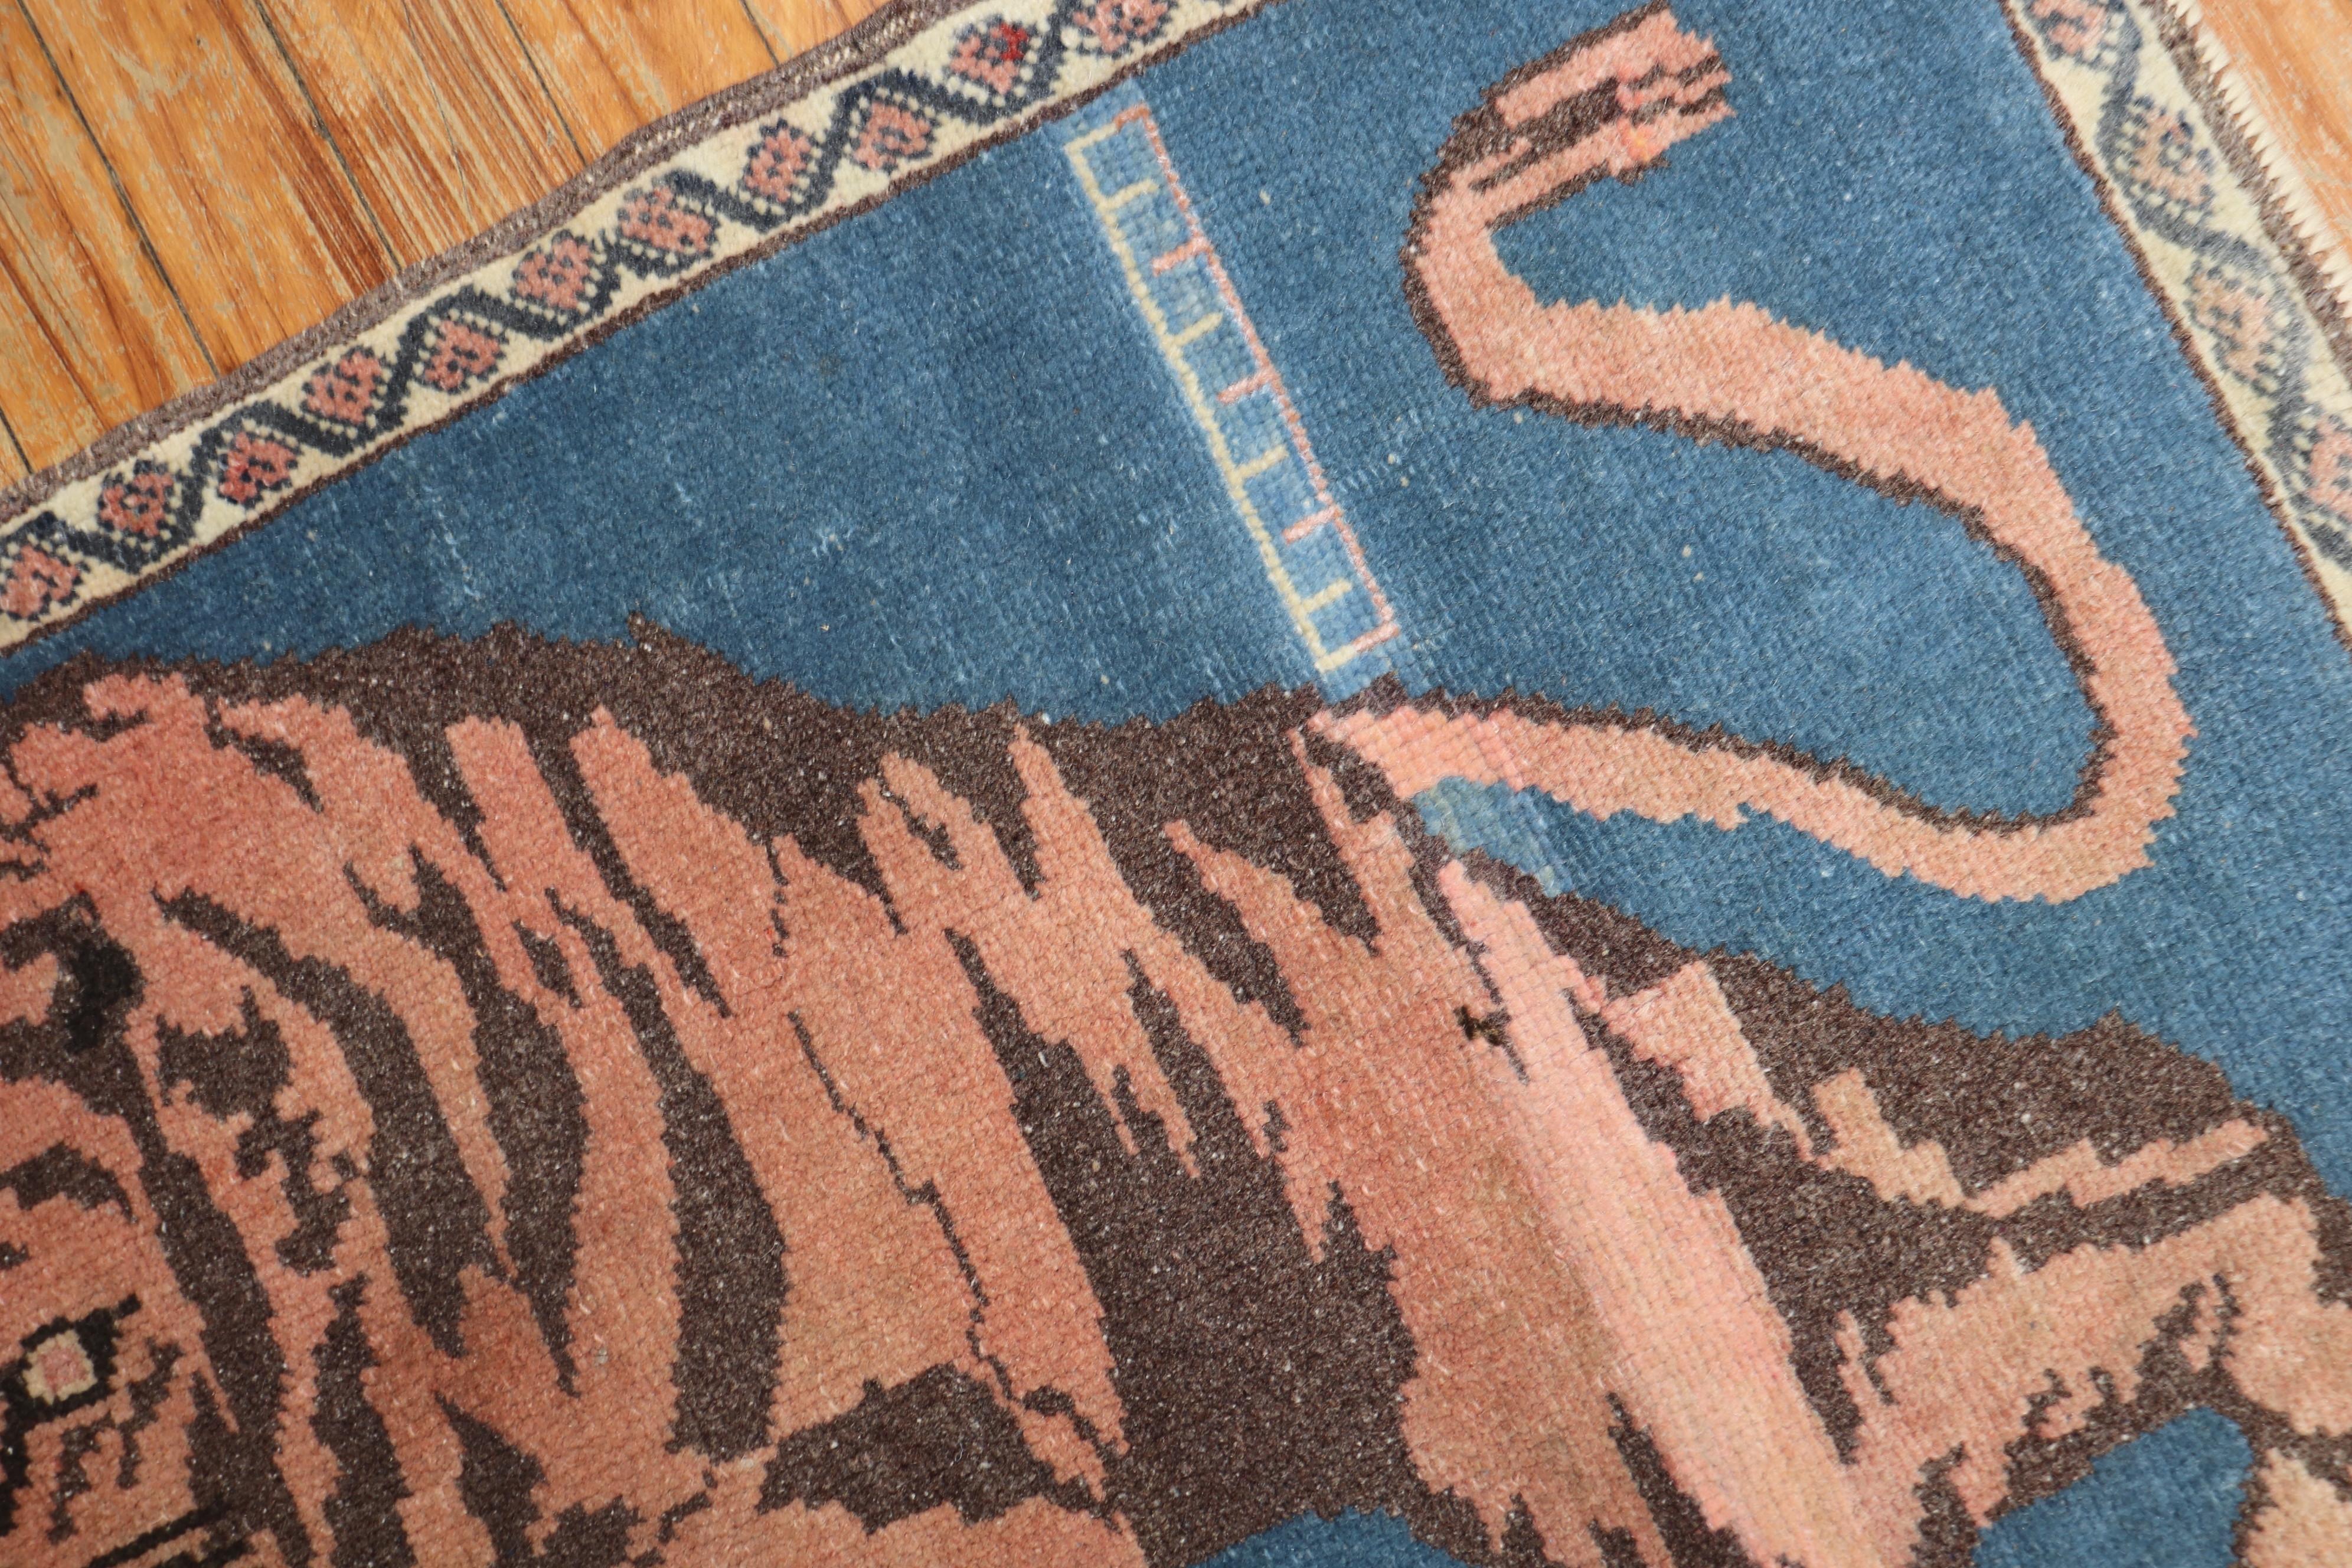 Hand-Knotted Denim Blue Roaring Tiger Pictorial Turkish 20th Century Wool Rug